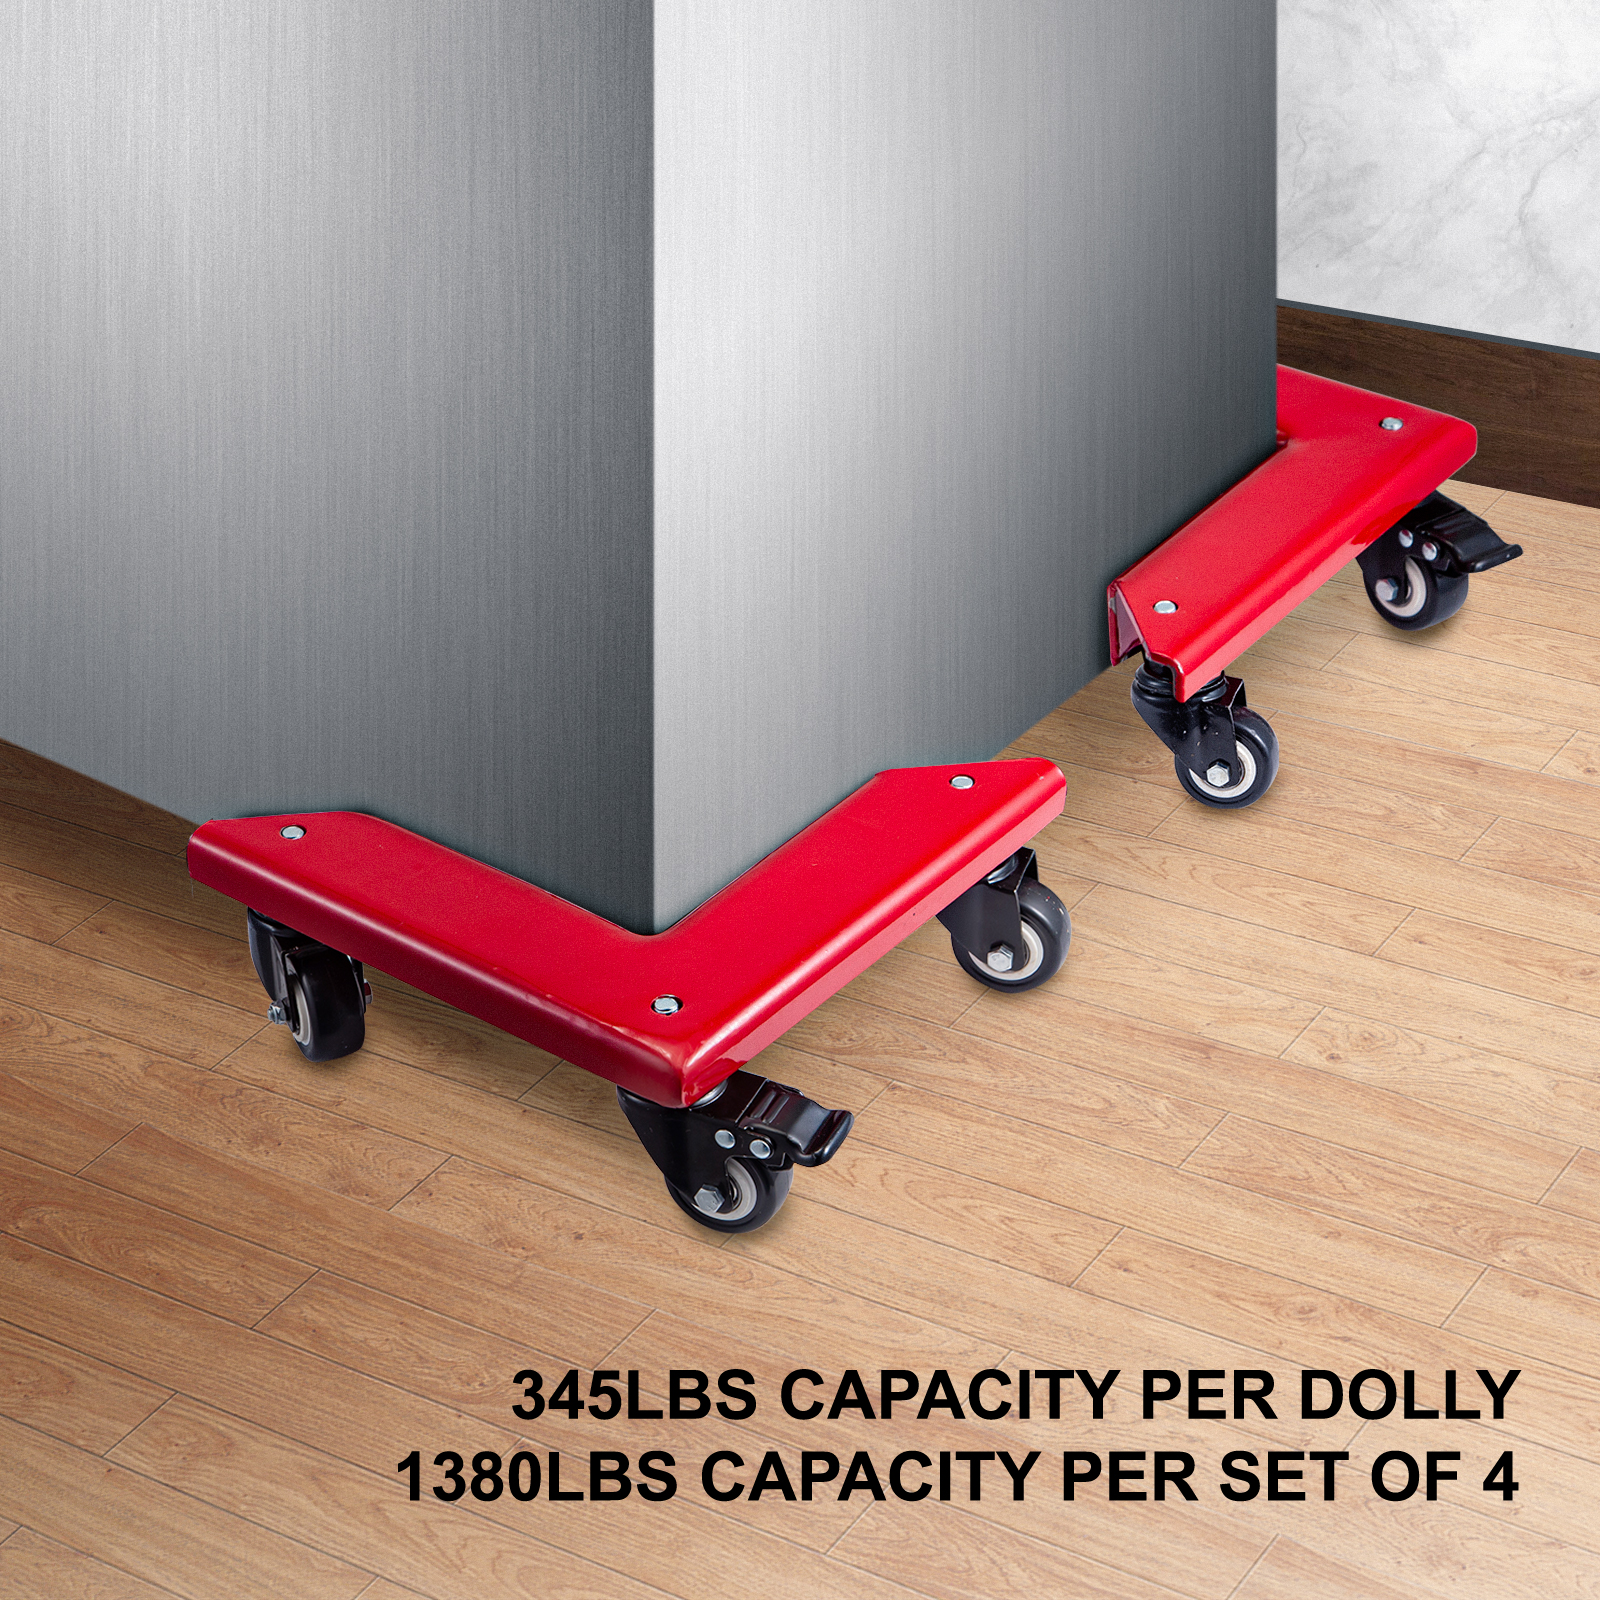 BestEquip Furniture Dolly 1380Lbs Capacity Corner Moving Dolly 4-Pack Desk Cabinet Dolly Furniture Moving Cart with 2-Inch Swivel Wheels Portable Furniture Rollers for Furniture Handling Moving Red 